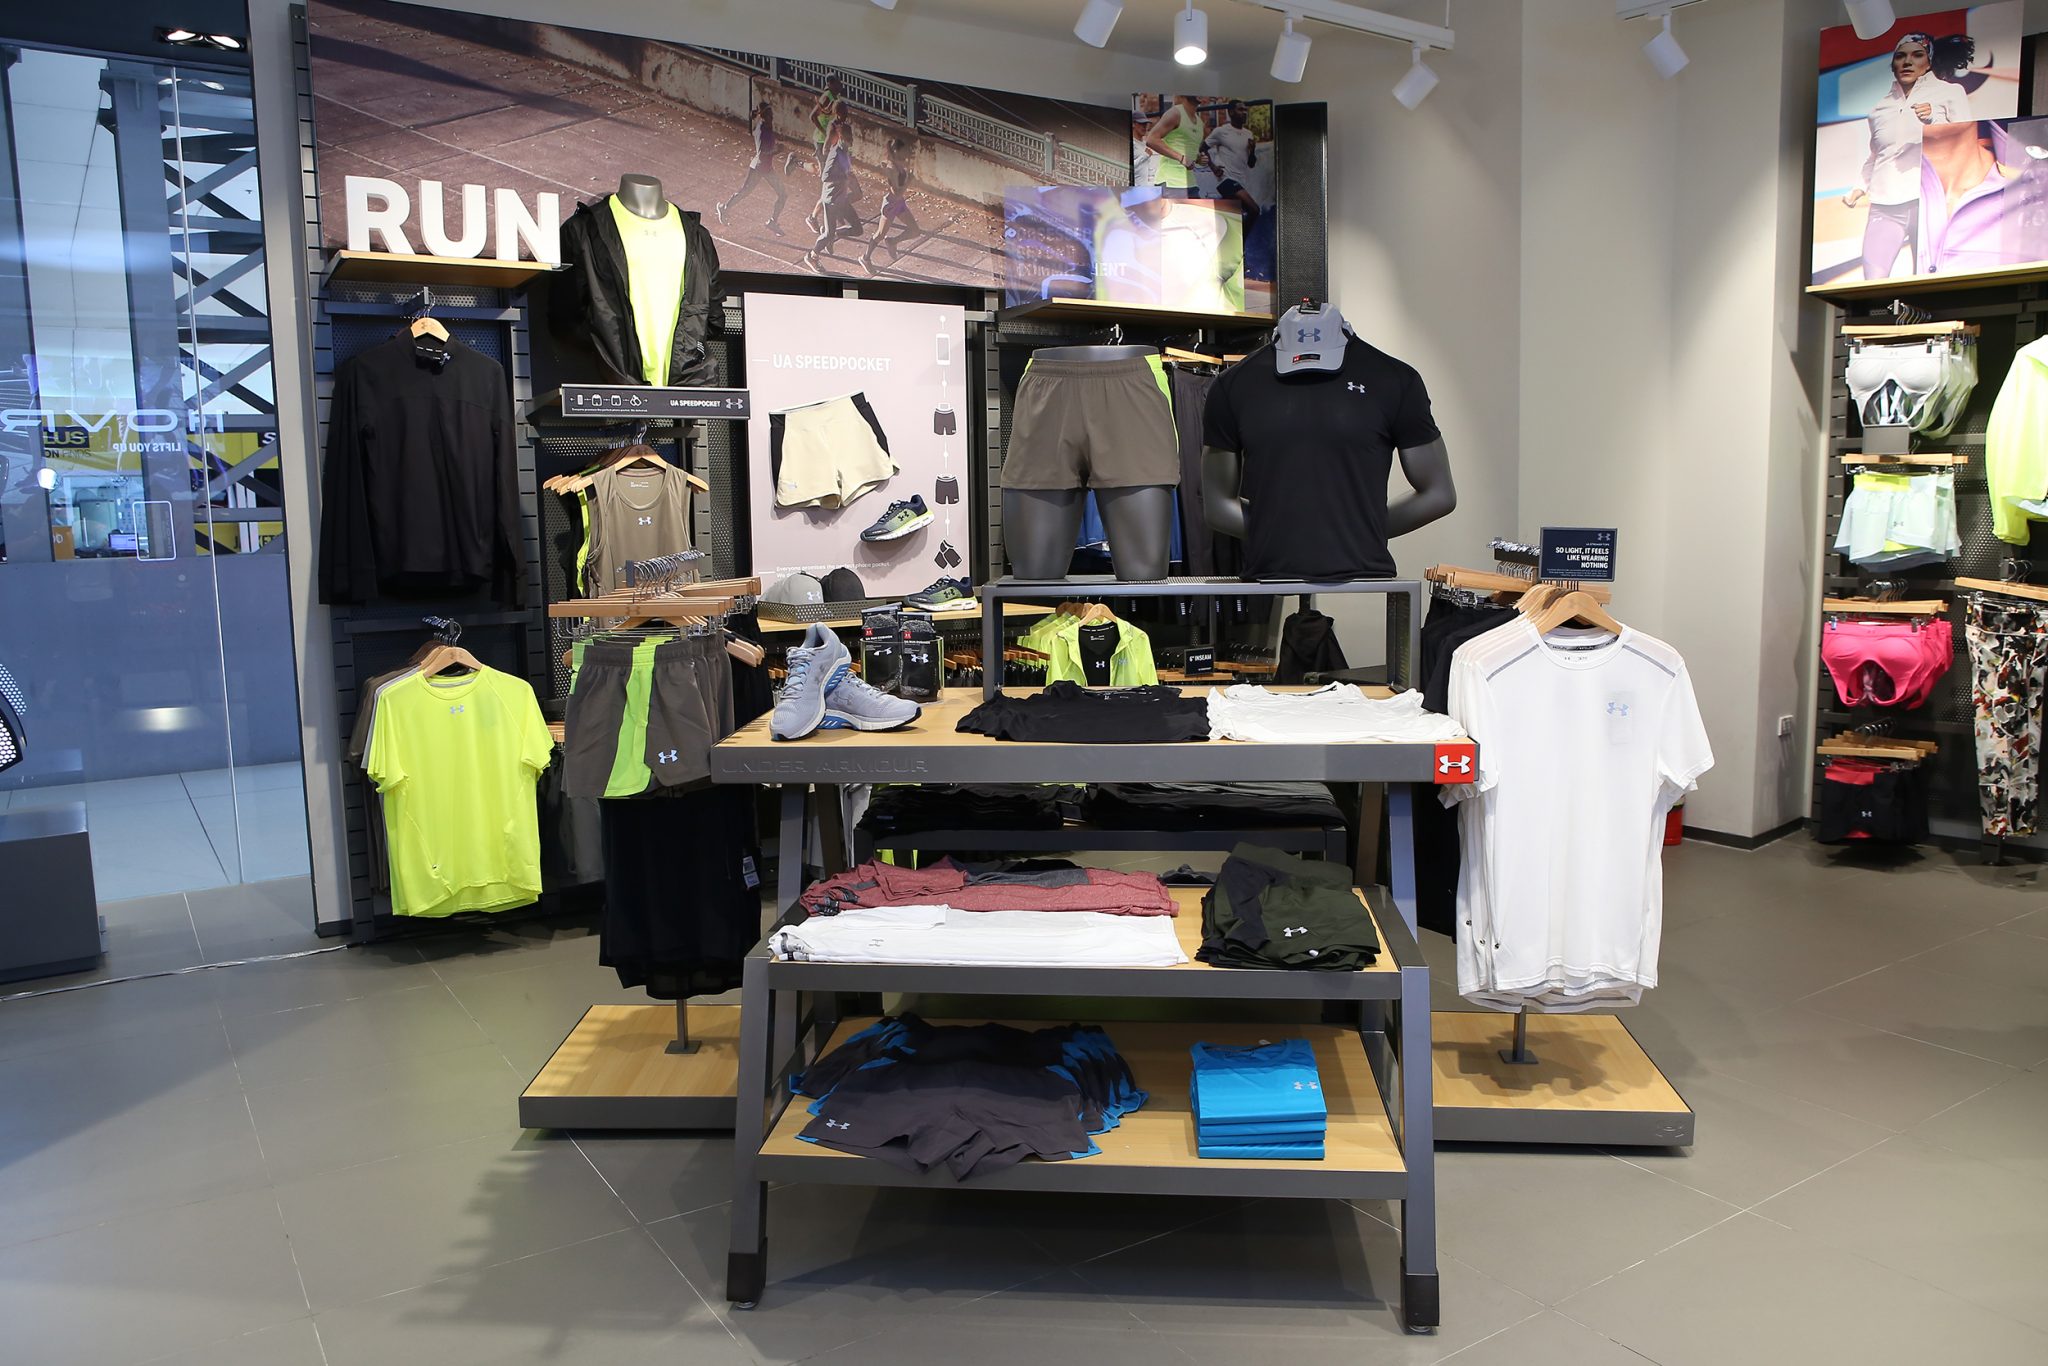 Inside the 290-square meter store, performance wear take center stage but athleisure items are also available